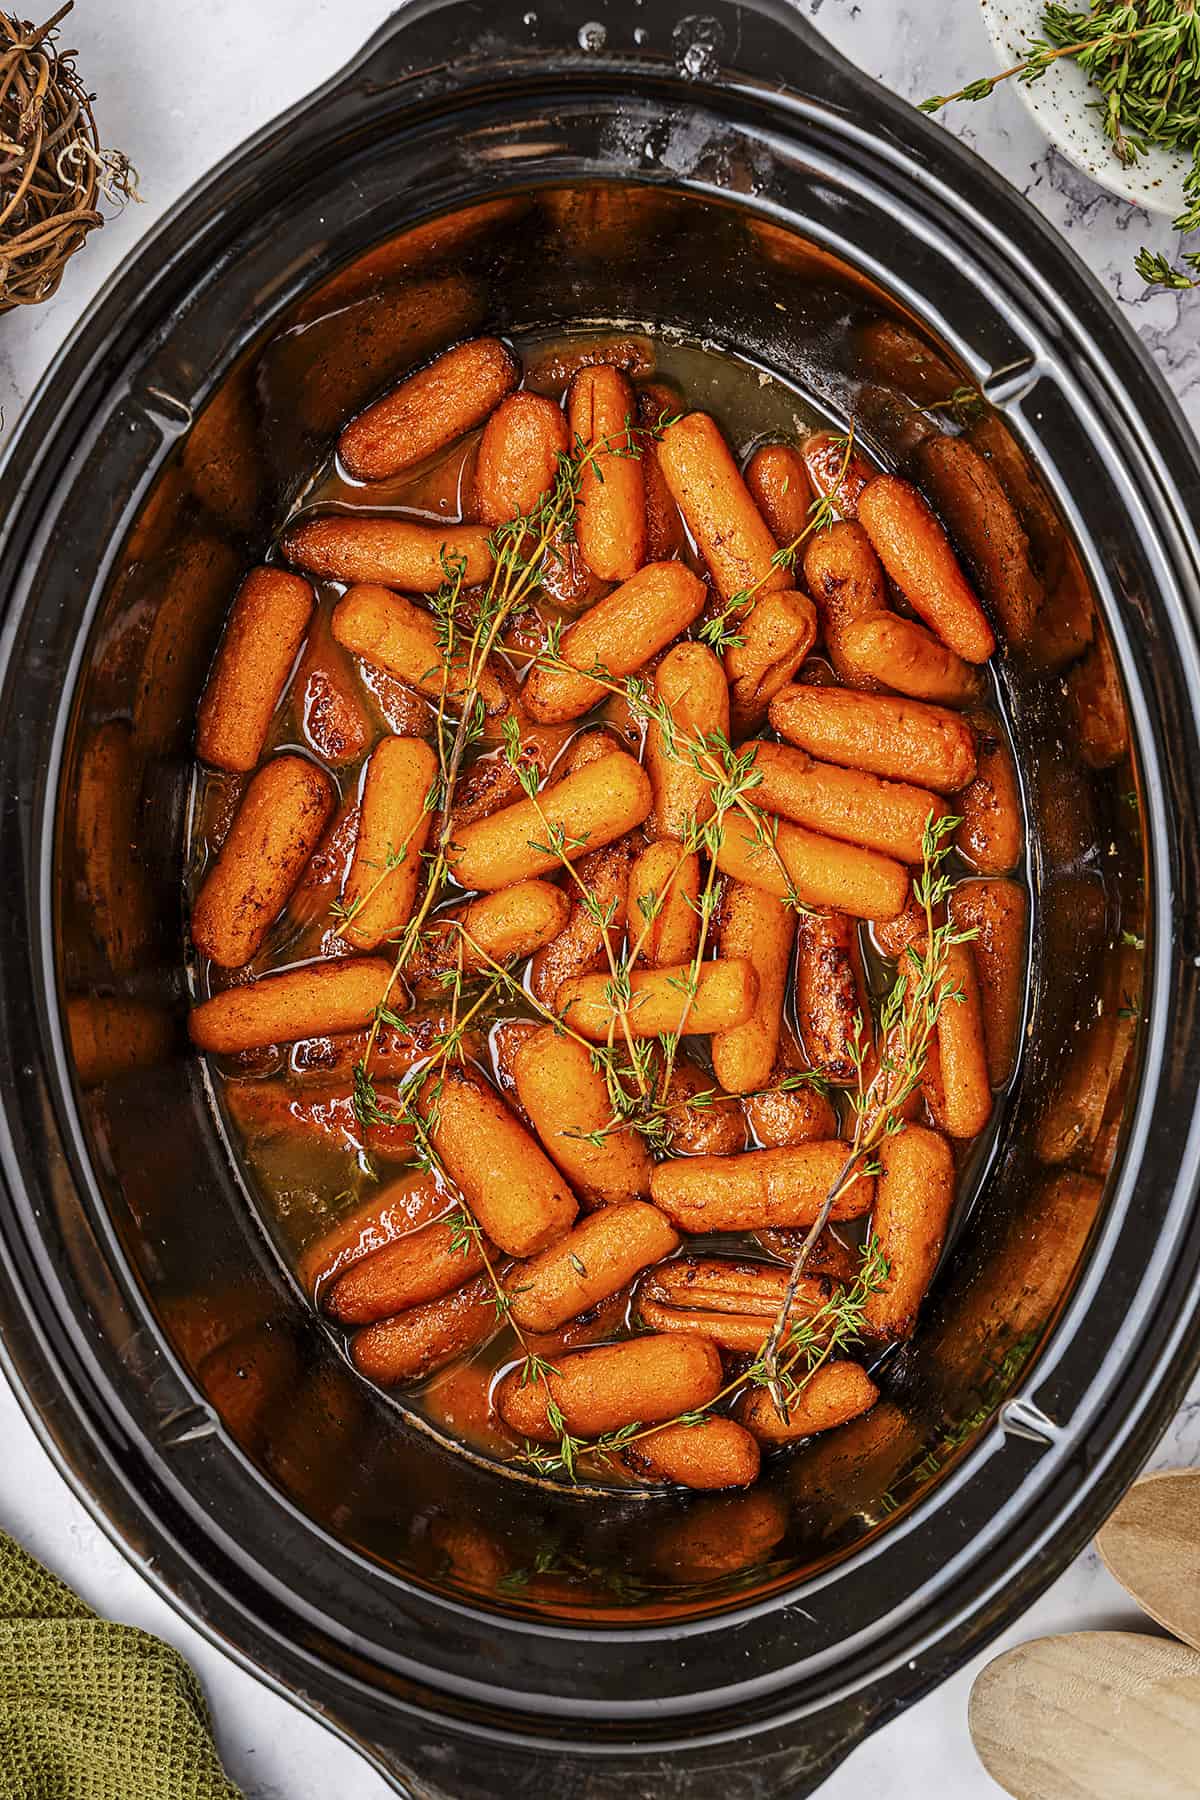 Overhead view of carrots in slow cooker.